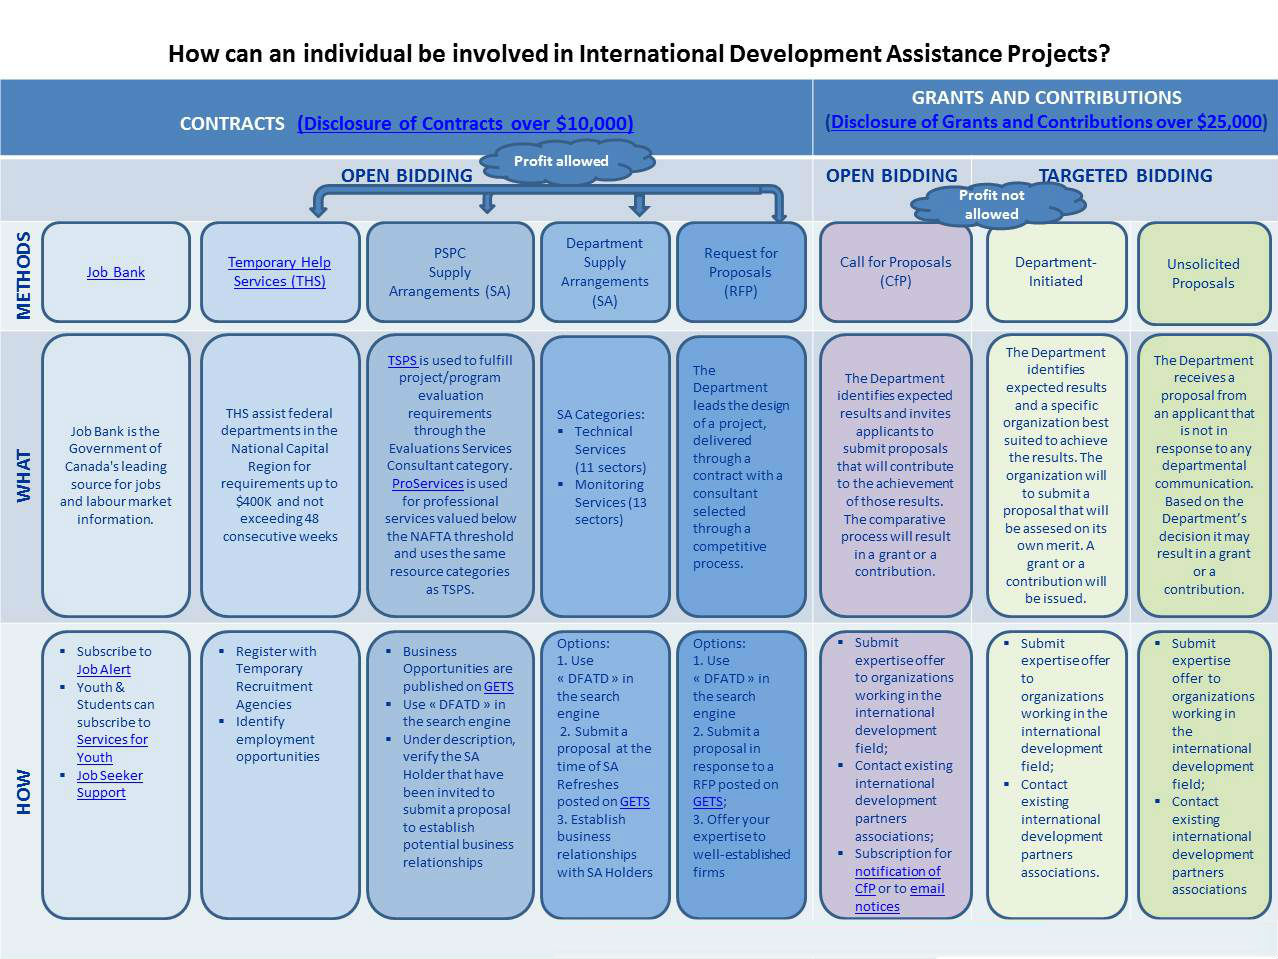 How can an individual be involved in International Development Assistance Projects?